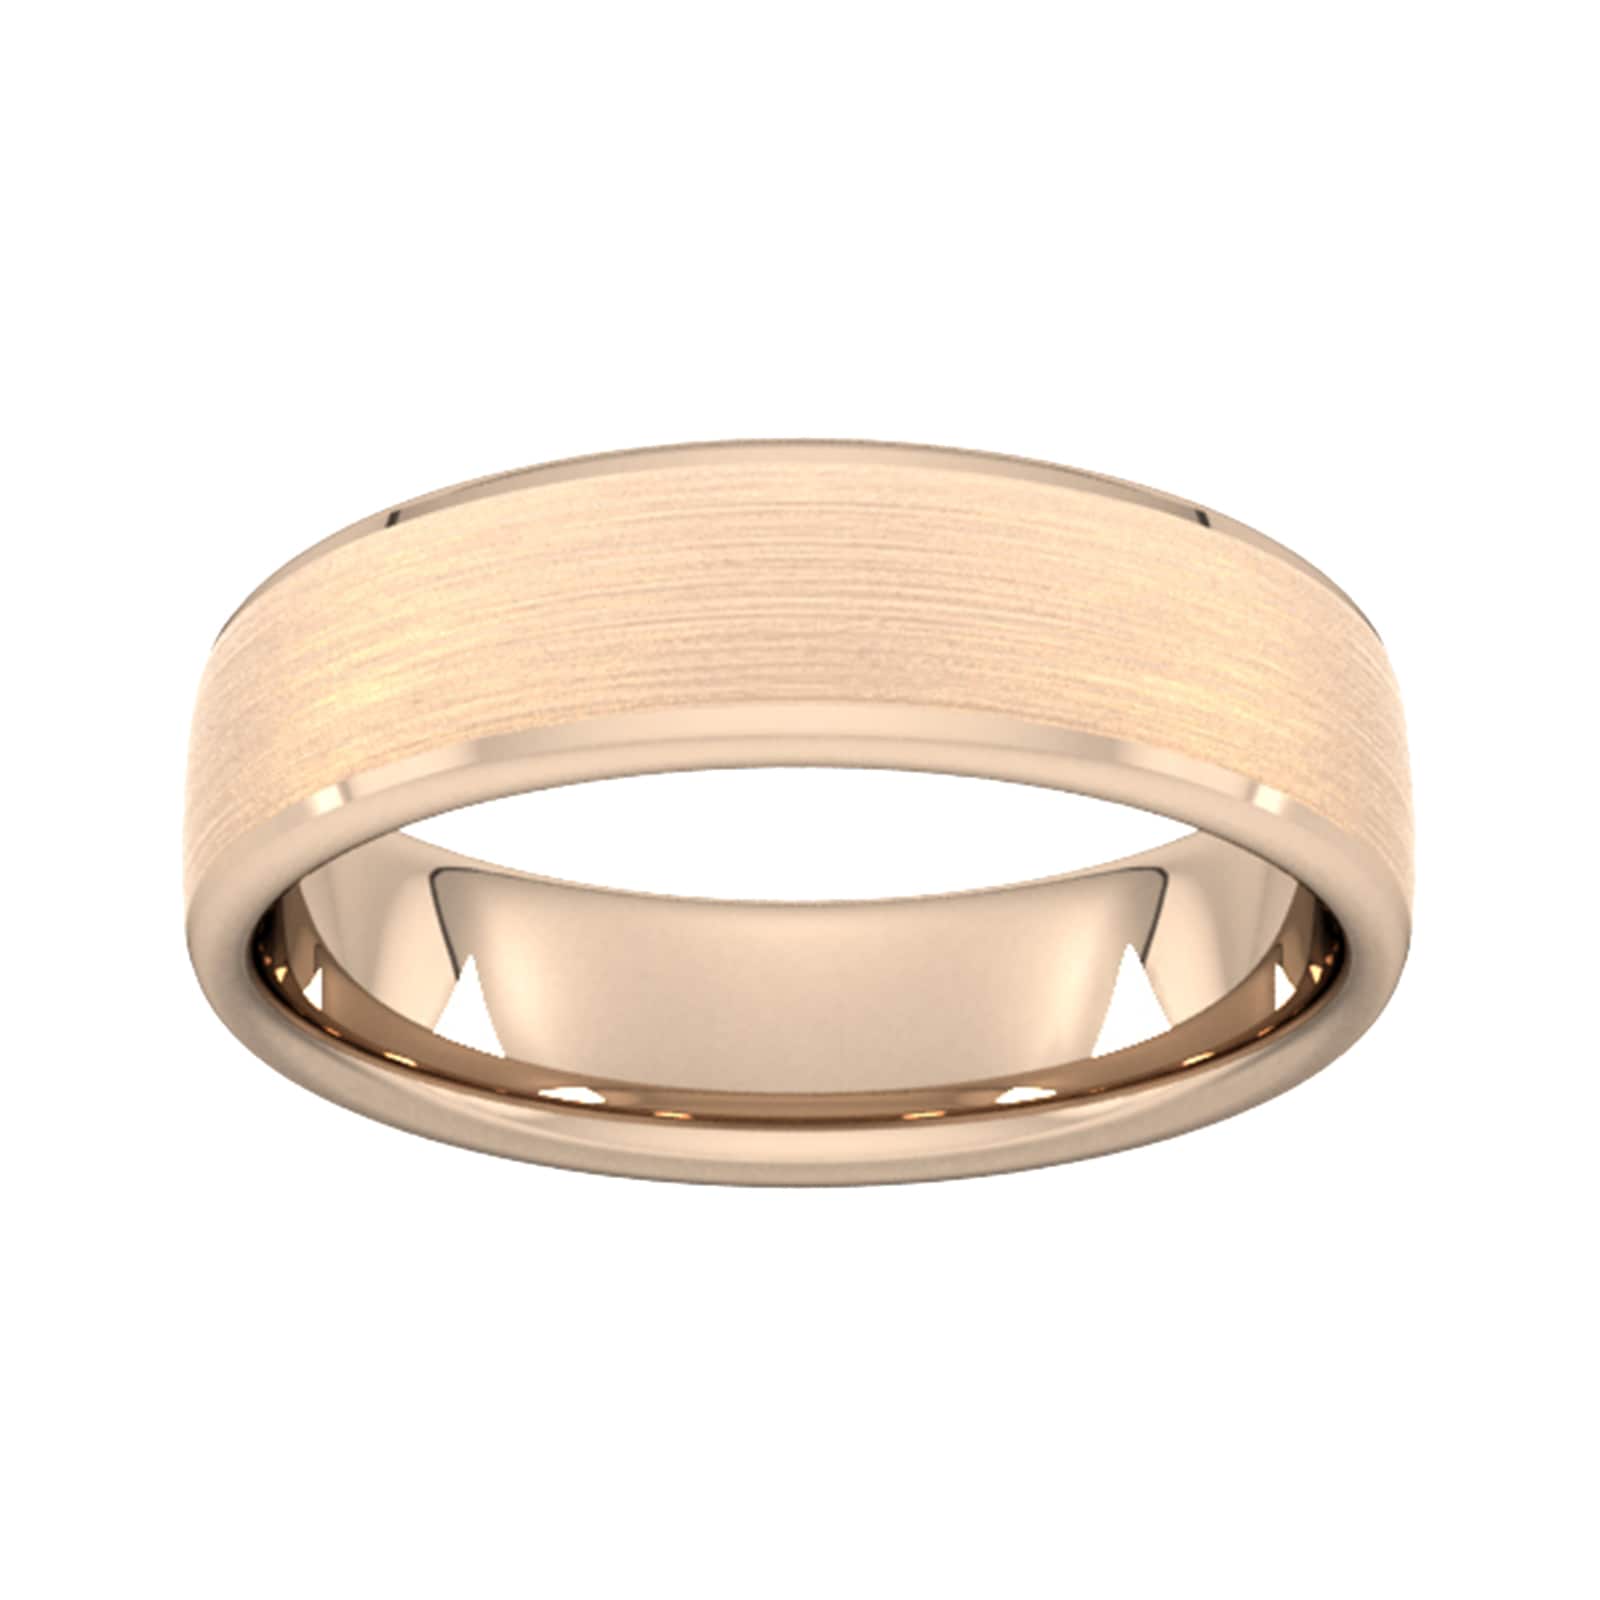 6mm Traditional Court Heavy Polished Chamfered Edges With Matt Centre Wedding Ring In 18 Carat Rose Gold - Ring Size I